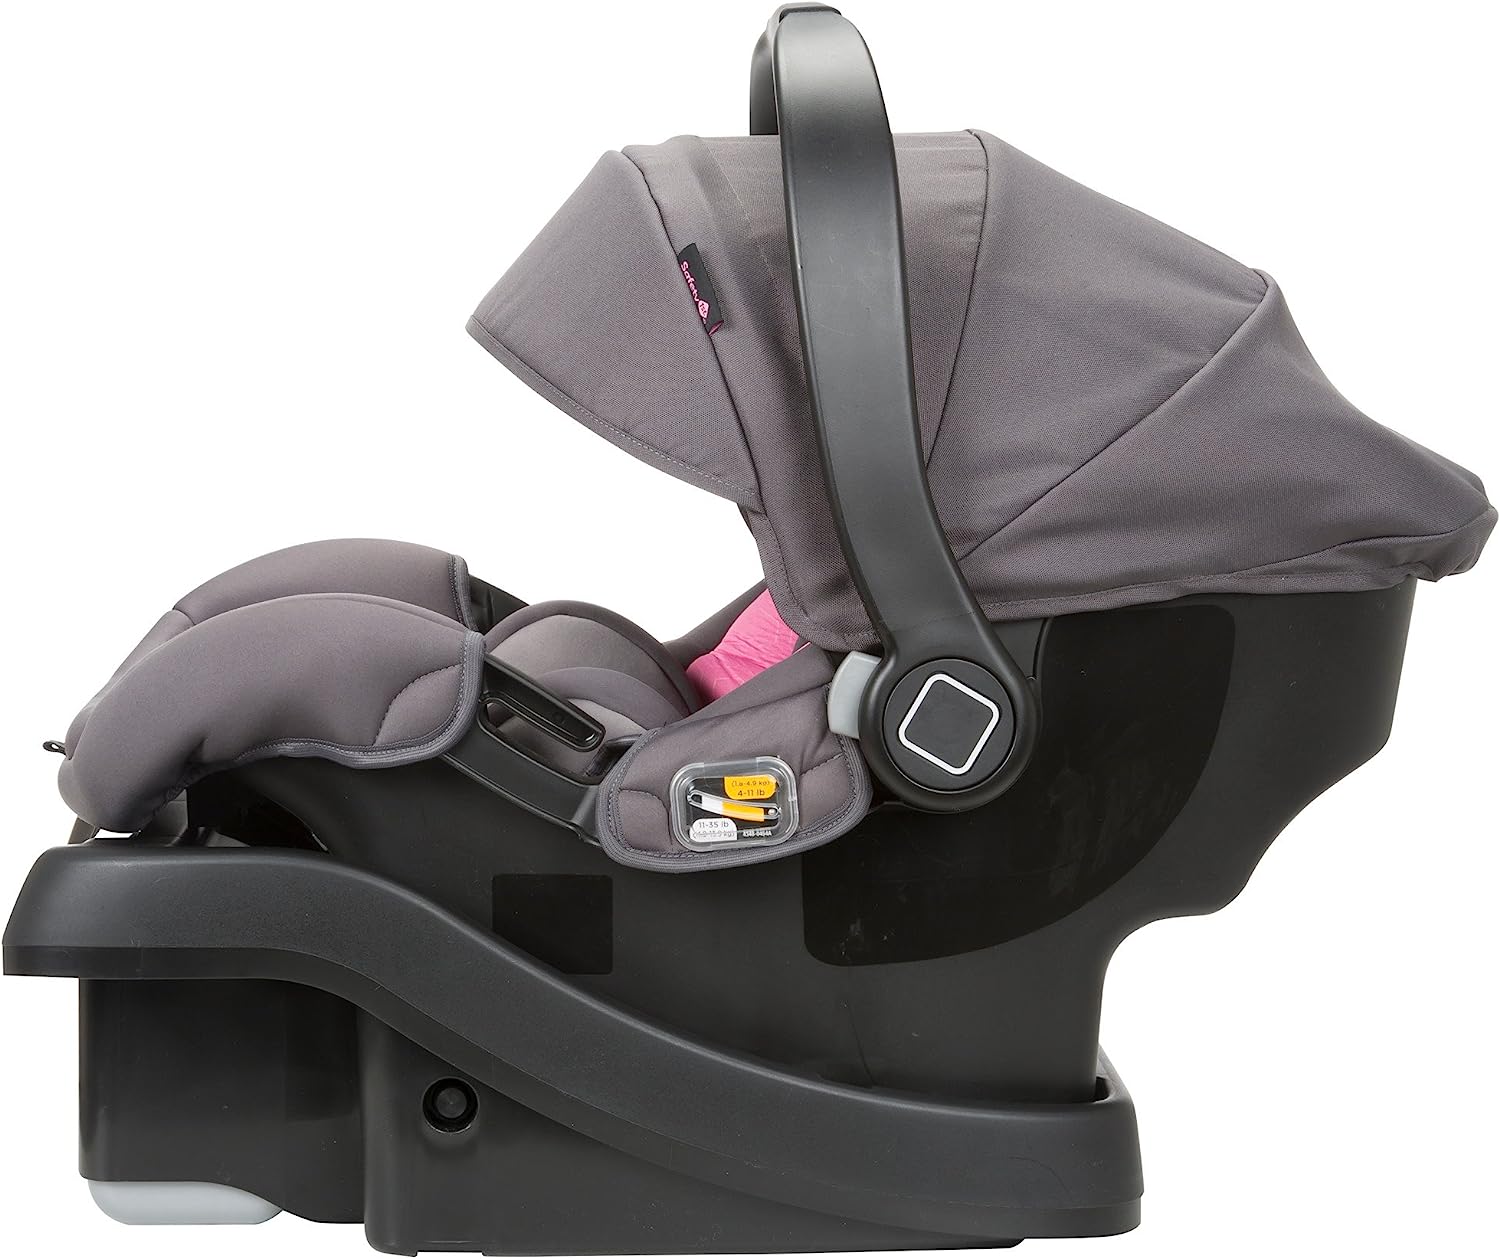 SAFETY 1ST ON BOARD 35 AIR 360 INFANT CAR SEAT  BLUSH PINK